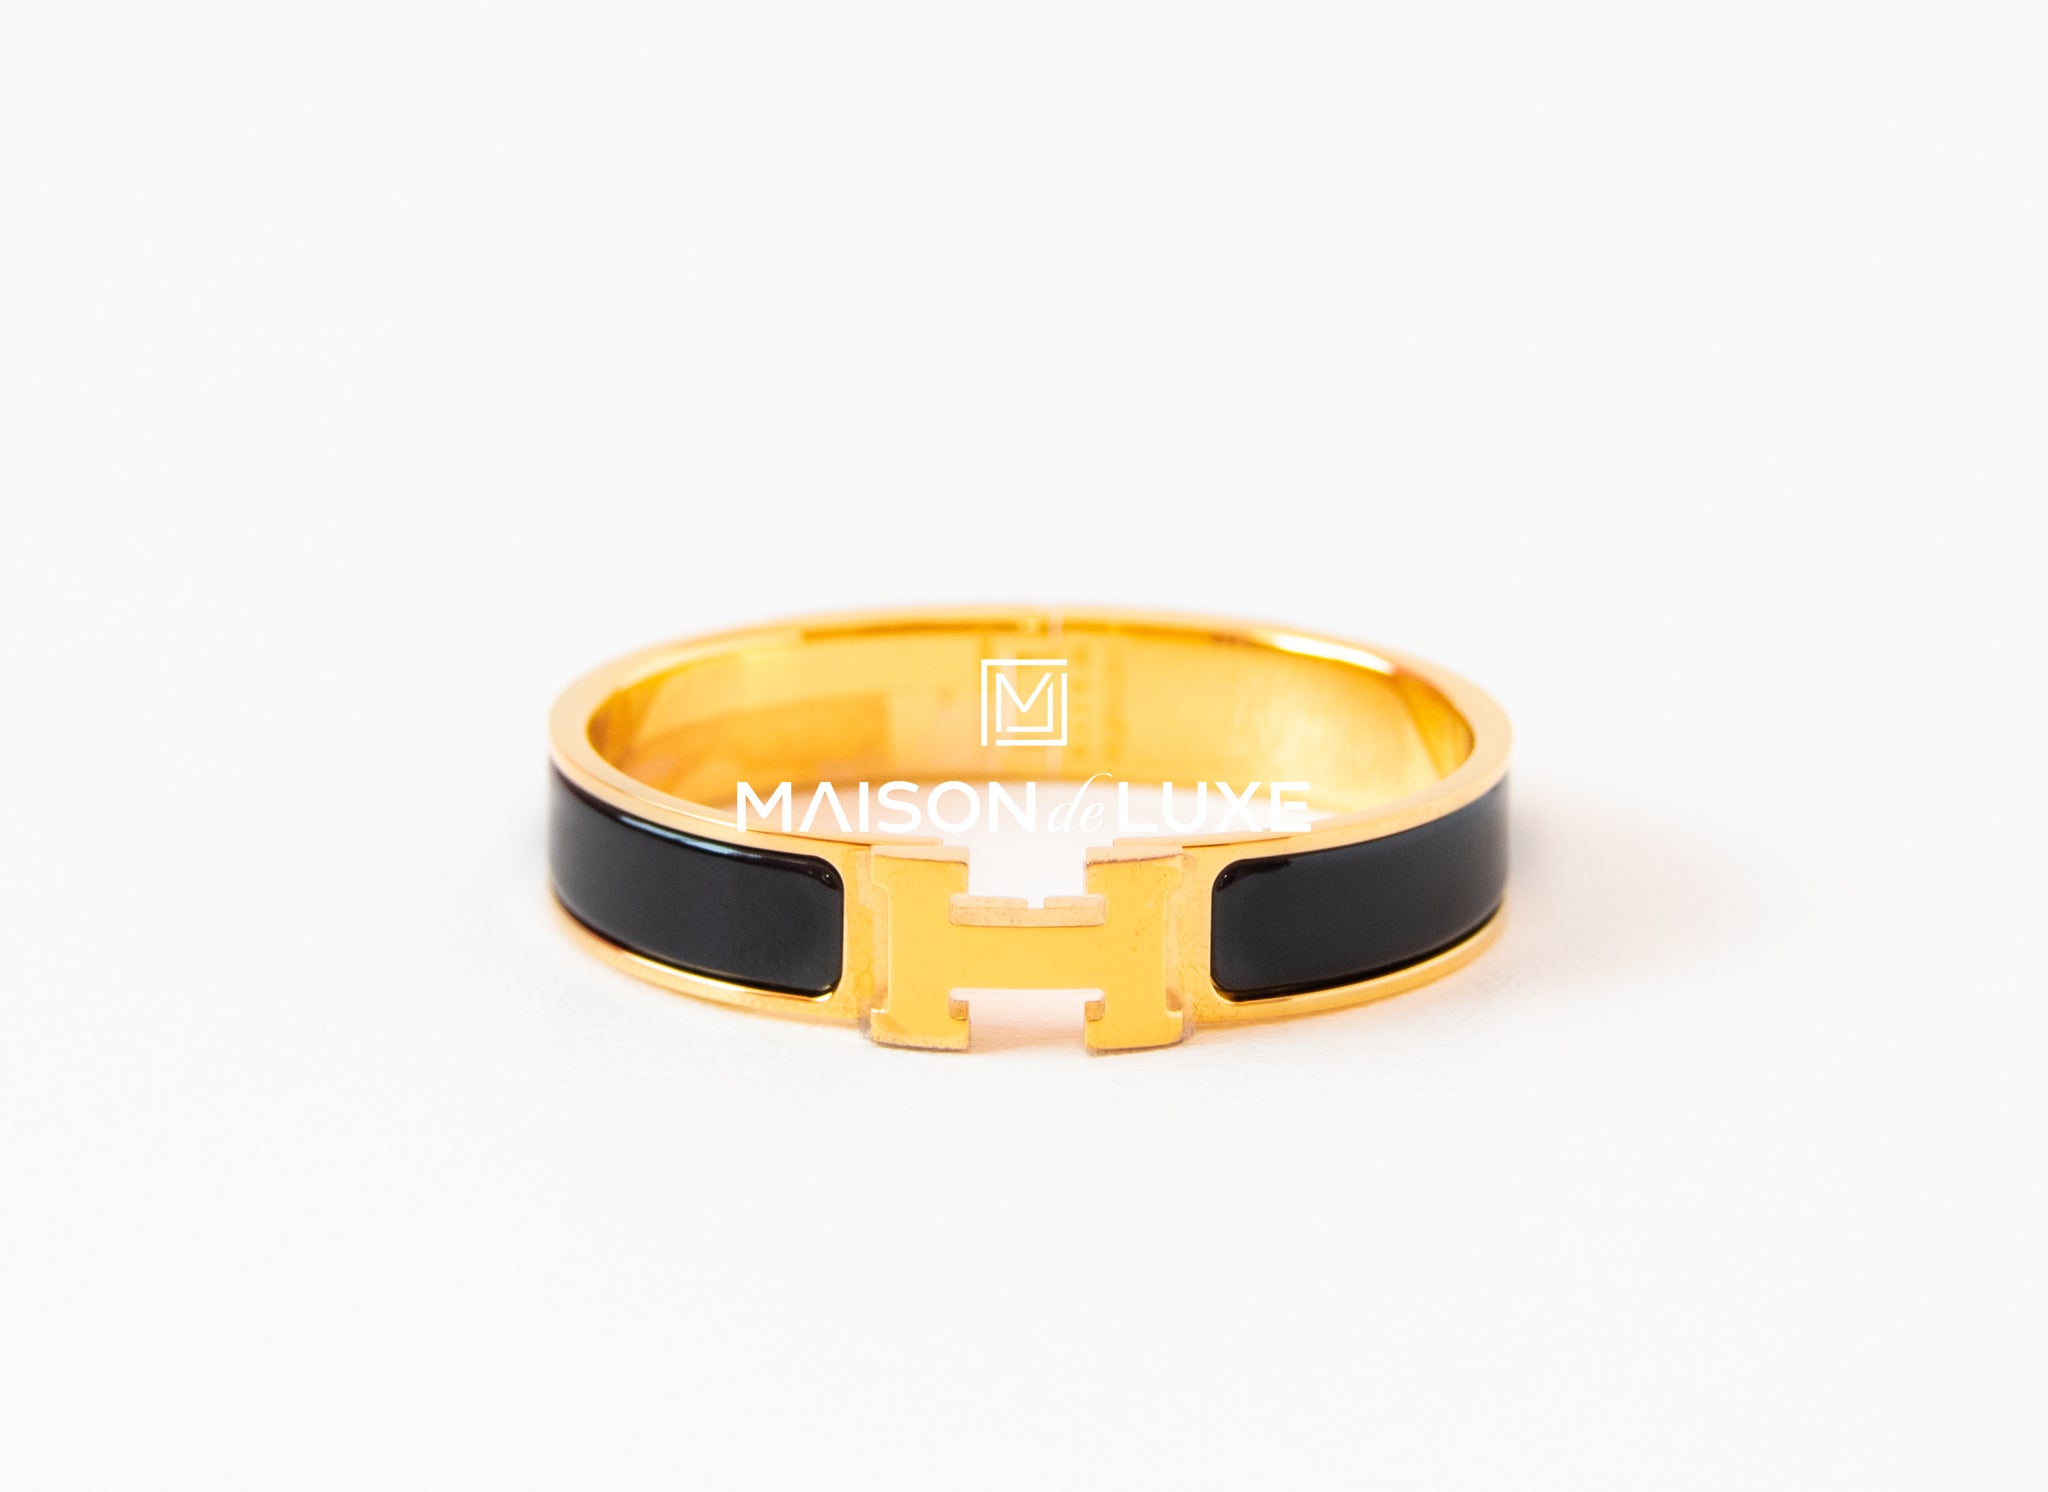 Hermes Clic Clac H Bracelet in 18kt Yellow Gold with Black Leather,Narrow -  Hermes Bracelets - Hermes Jewelry